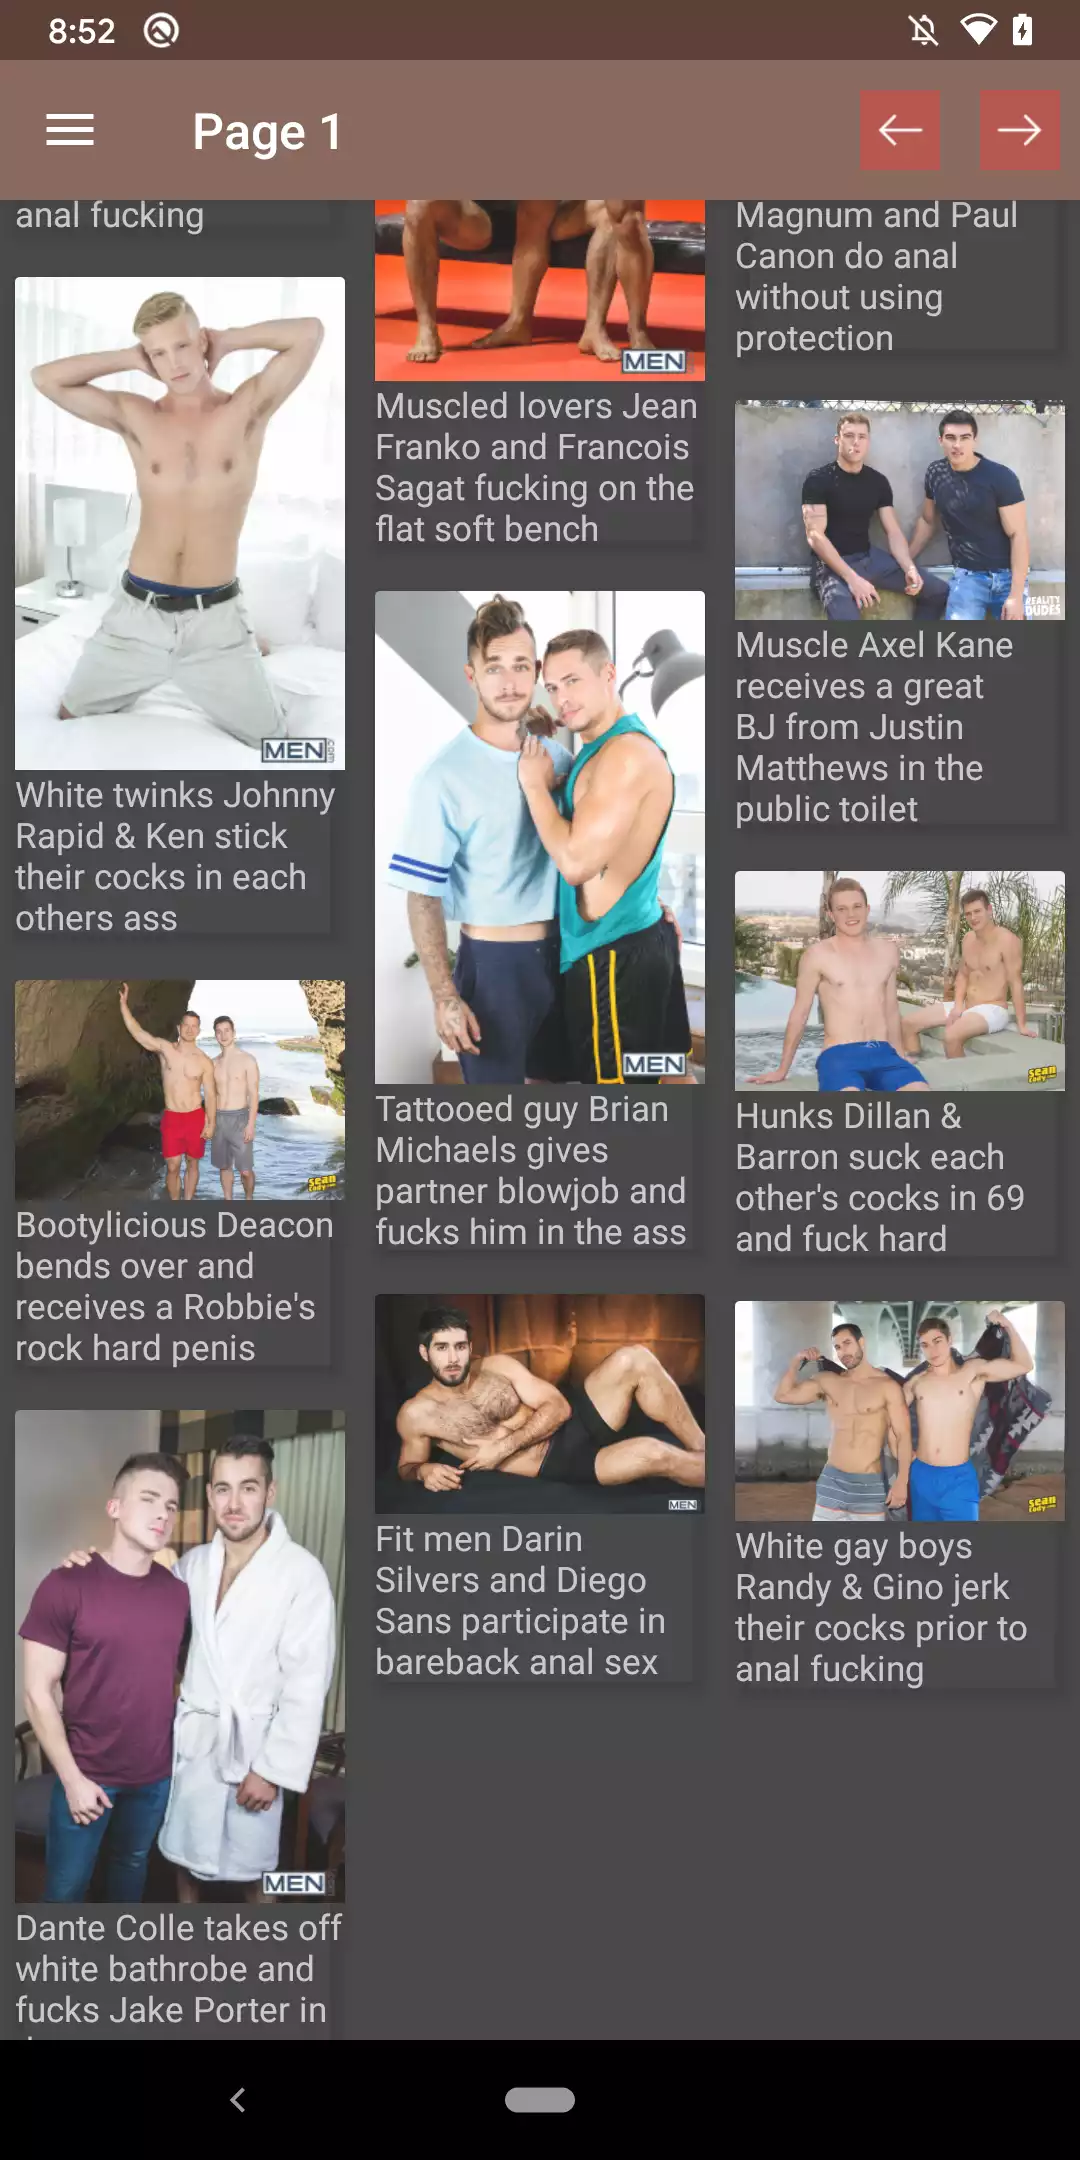 New Gay Galleries wallpapers,hotmilfpics,images,comixharem,gay,free,pictures,hot,hentai,pics,shemale,photos,sexy,men,porn,download,apk,star,sexgalleries,galleries,pornstar